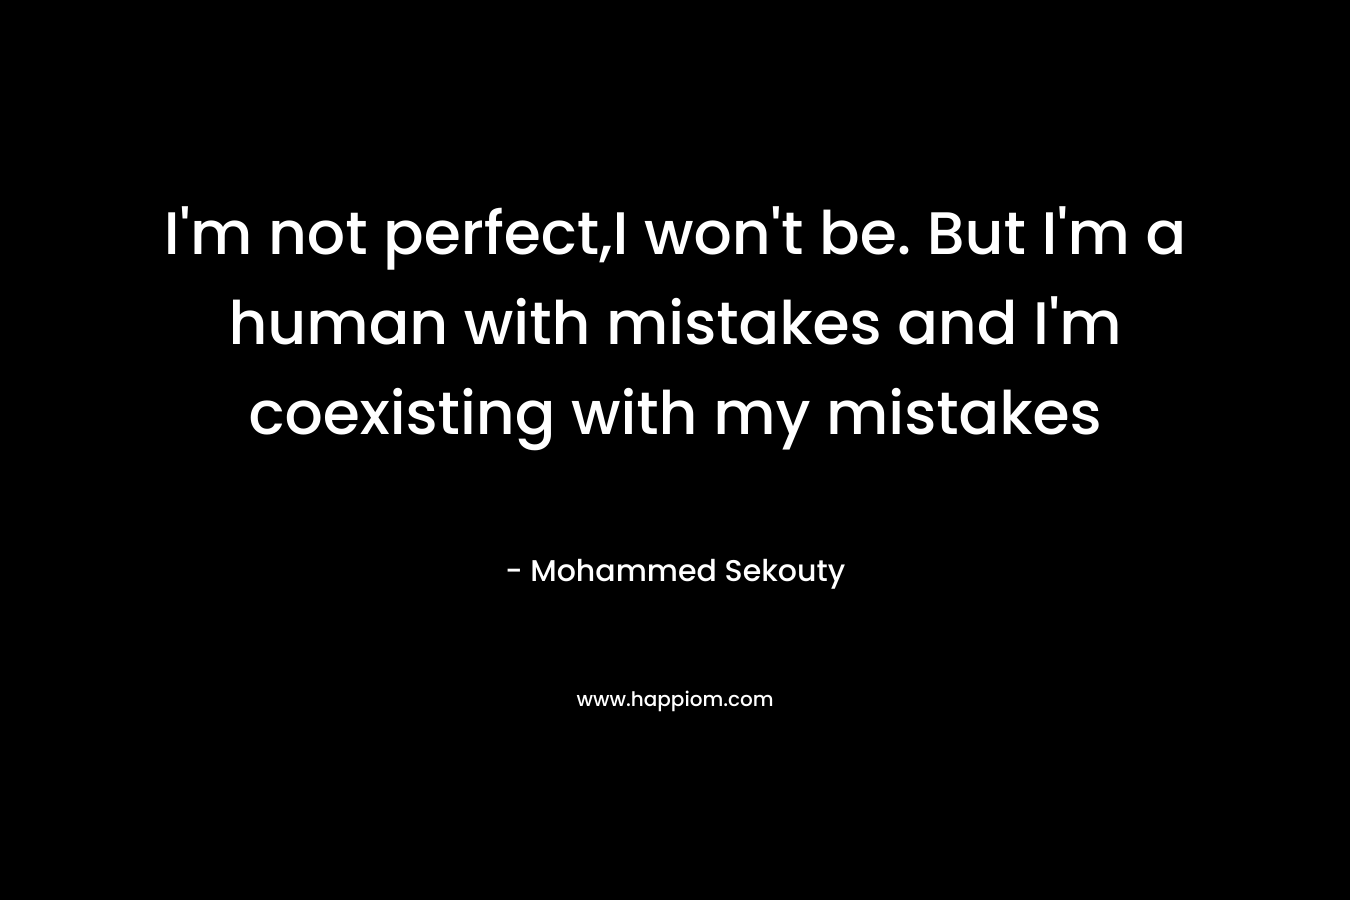 I'm not perfect,I won't be. But I'm a human with mistakes and I'm coexisting with my mistakes